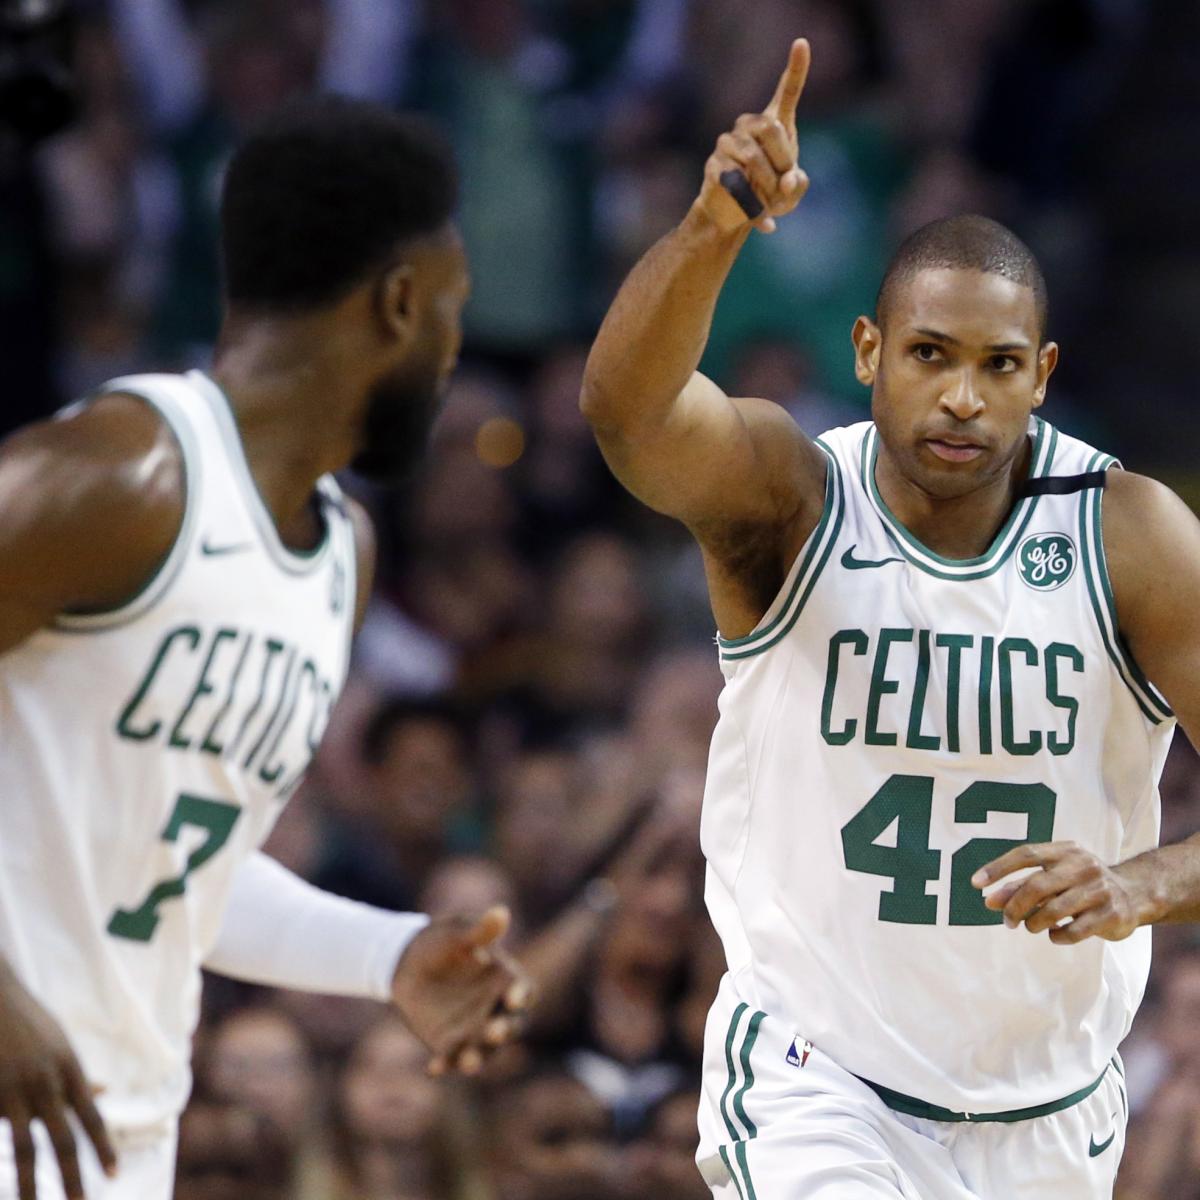 After a big Game 7 Celtics win TD Garden has its swagger back